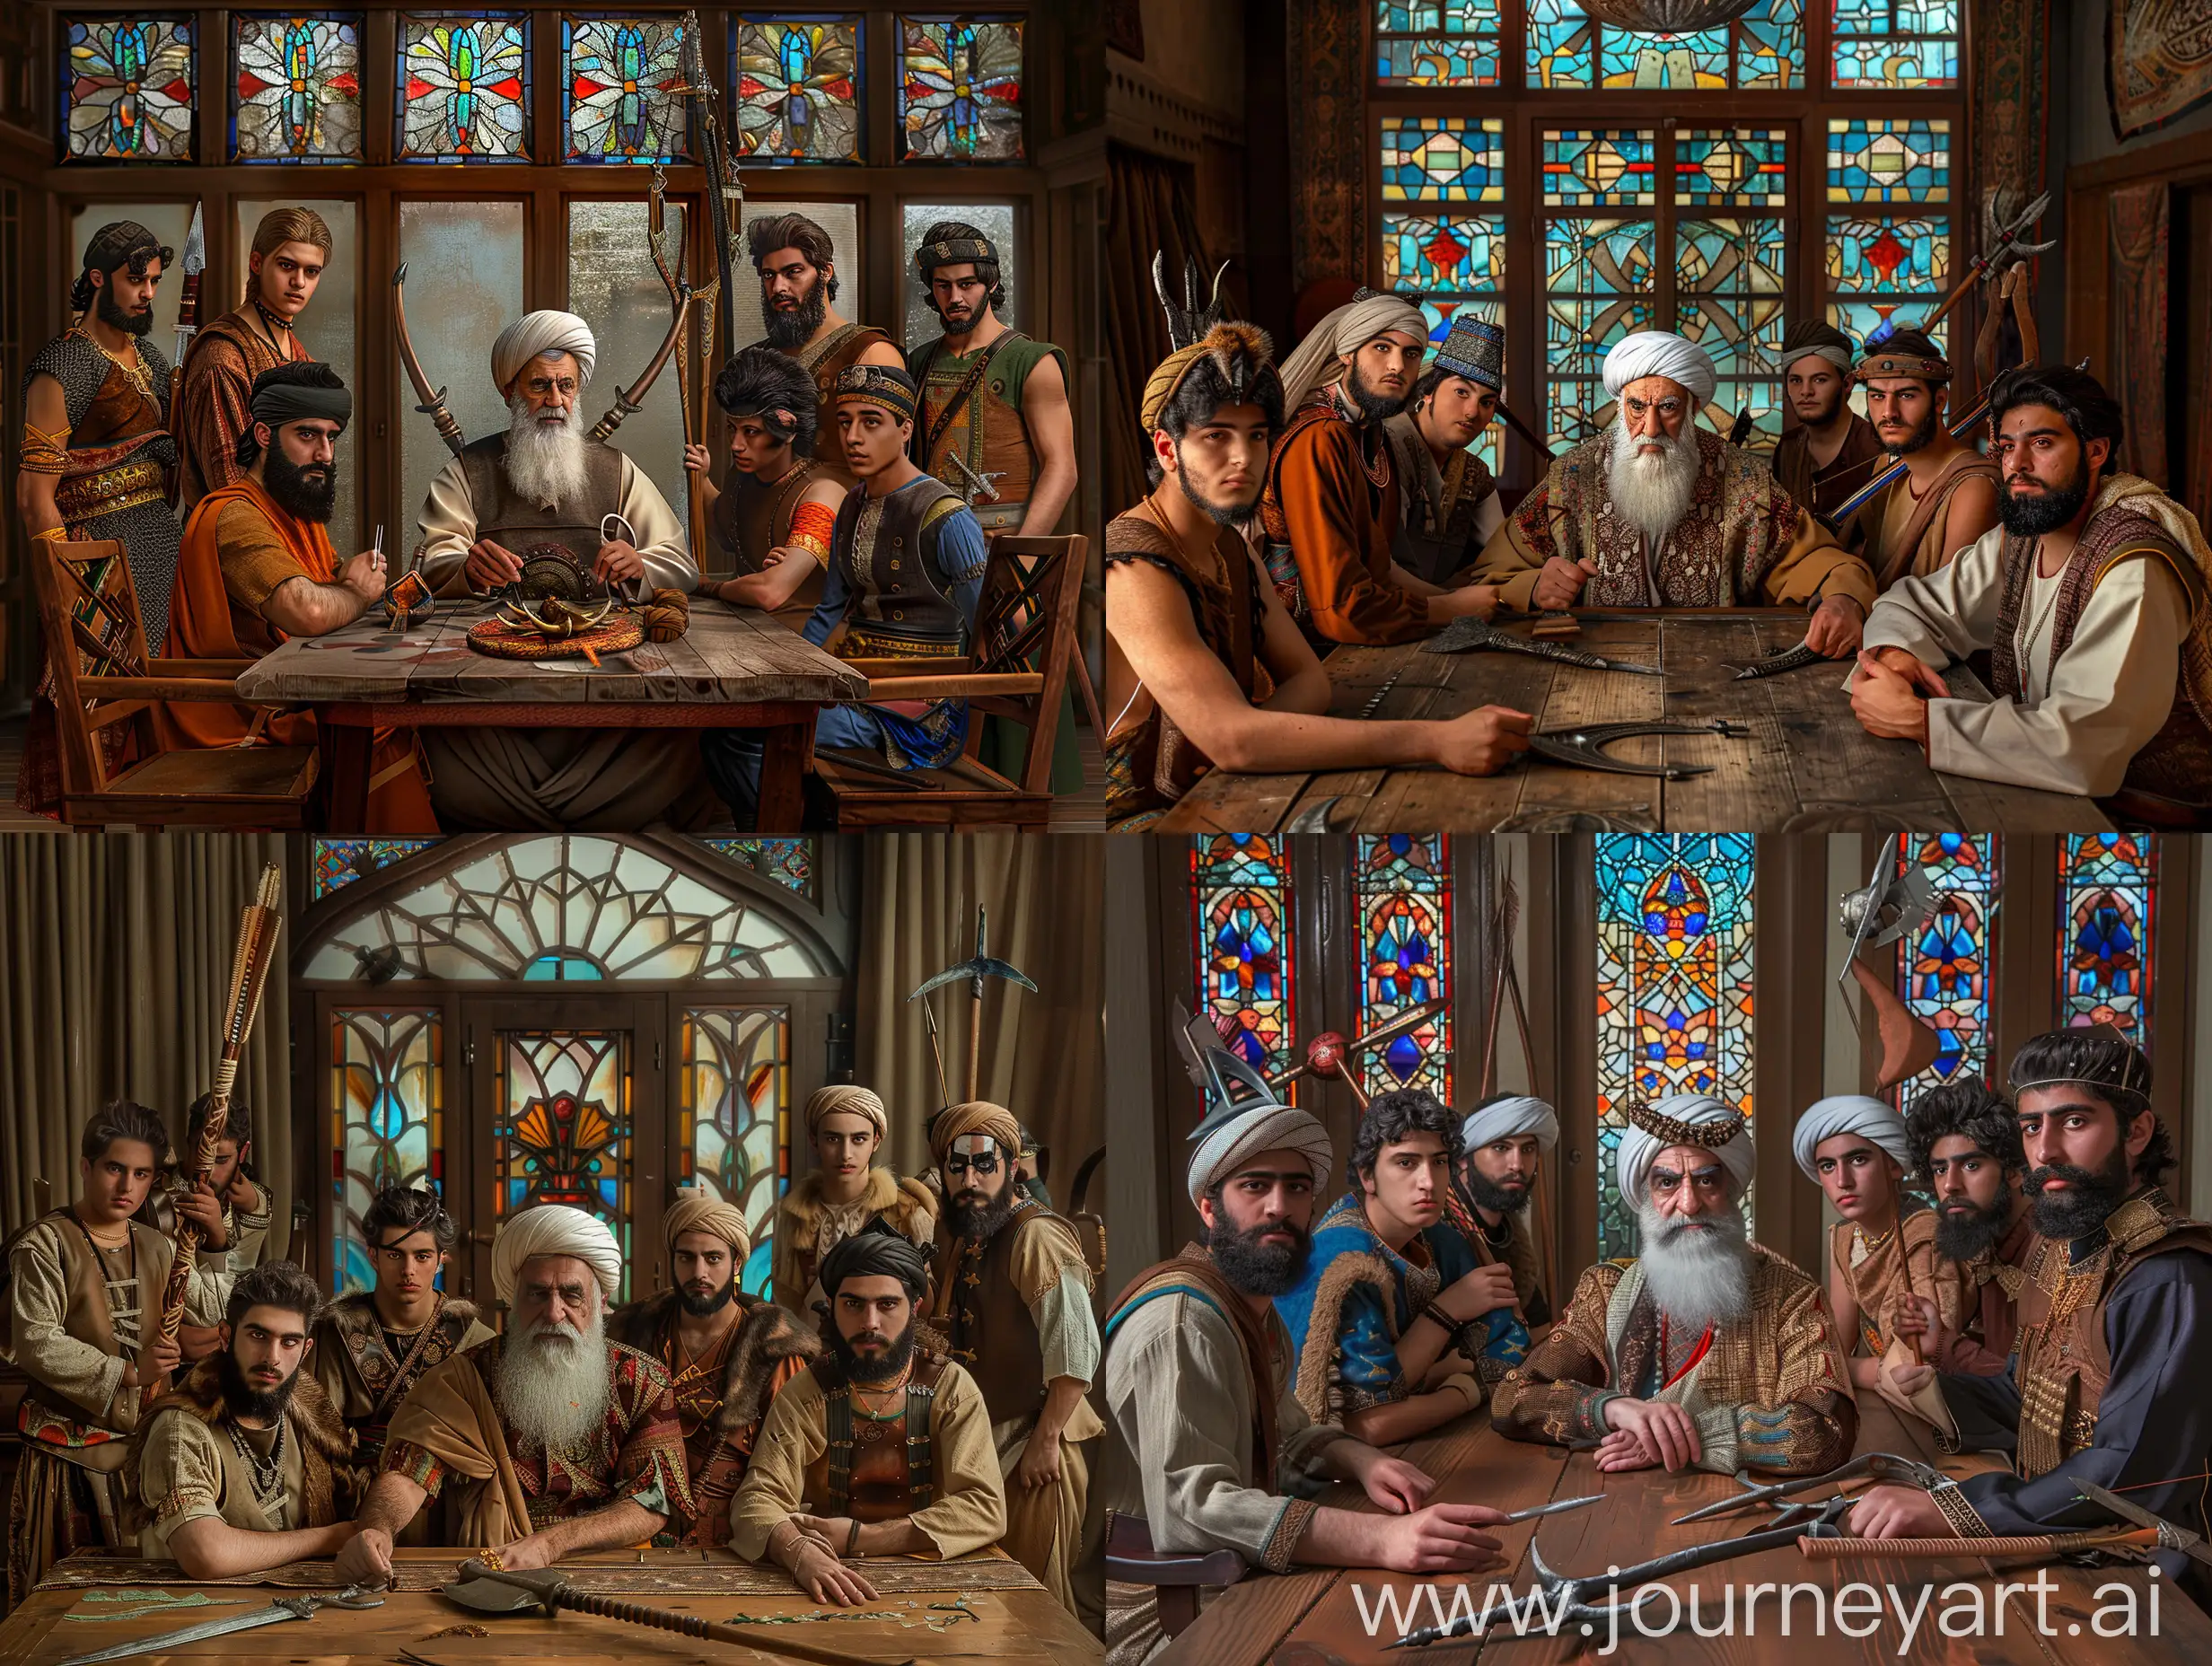 In a traditional house in ancient Iran with stained glass, a middle-aged man with a white beard is sitting at a wooden table with seven young men, the middle-aged man with a white beard is wearing a traditional Persian dress and a hat shaped like a lion's head. One of the seven young men has a black beard and a trident in his hand, another young man has a bow on his back and a short beard and a headband, another young man has two swords on his back and a traditional Persian dress. , the other young man has a beard in an ancient Iranian blacksmith costume, the other young man has a sword on his back, create a realistic photo with fine details for me